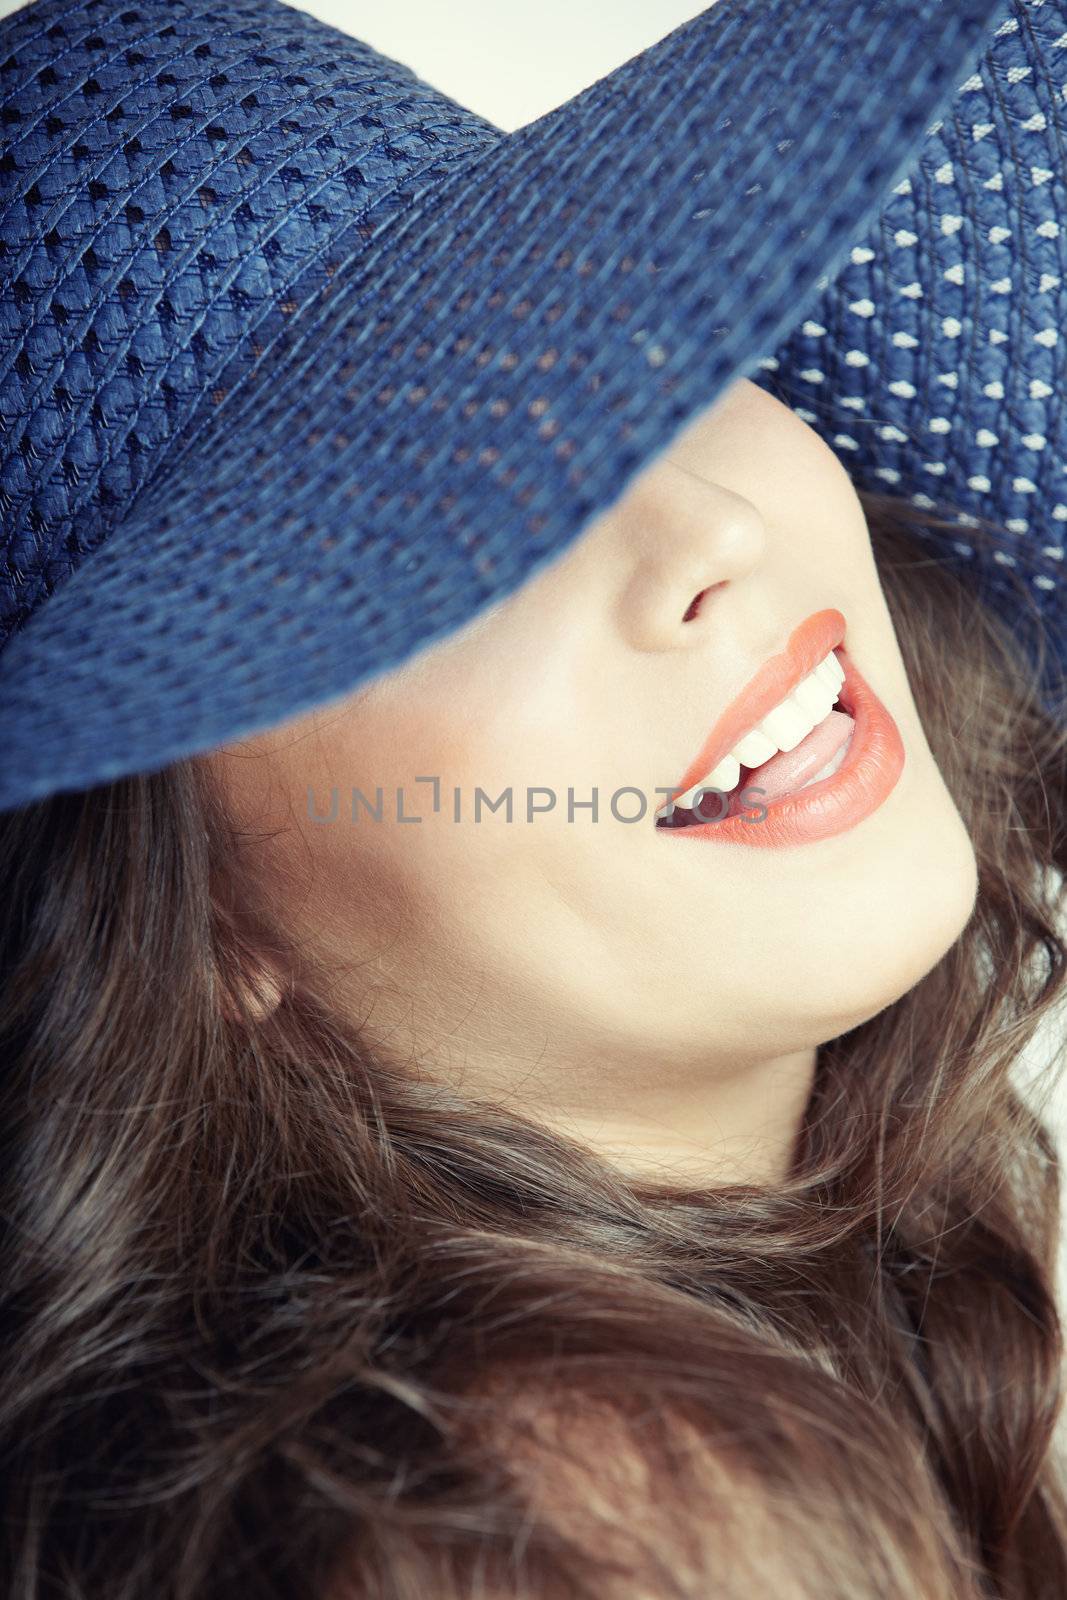 Laughing lady with blue hat on a studio background